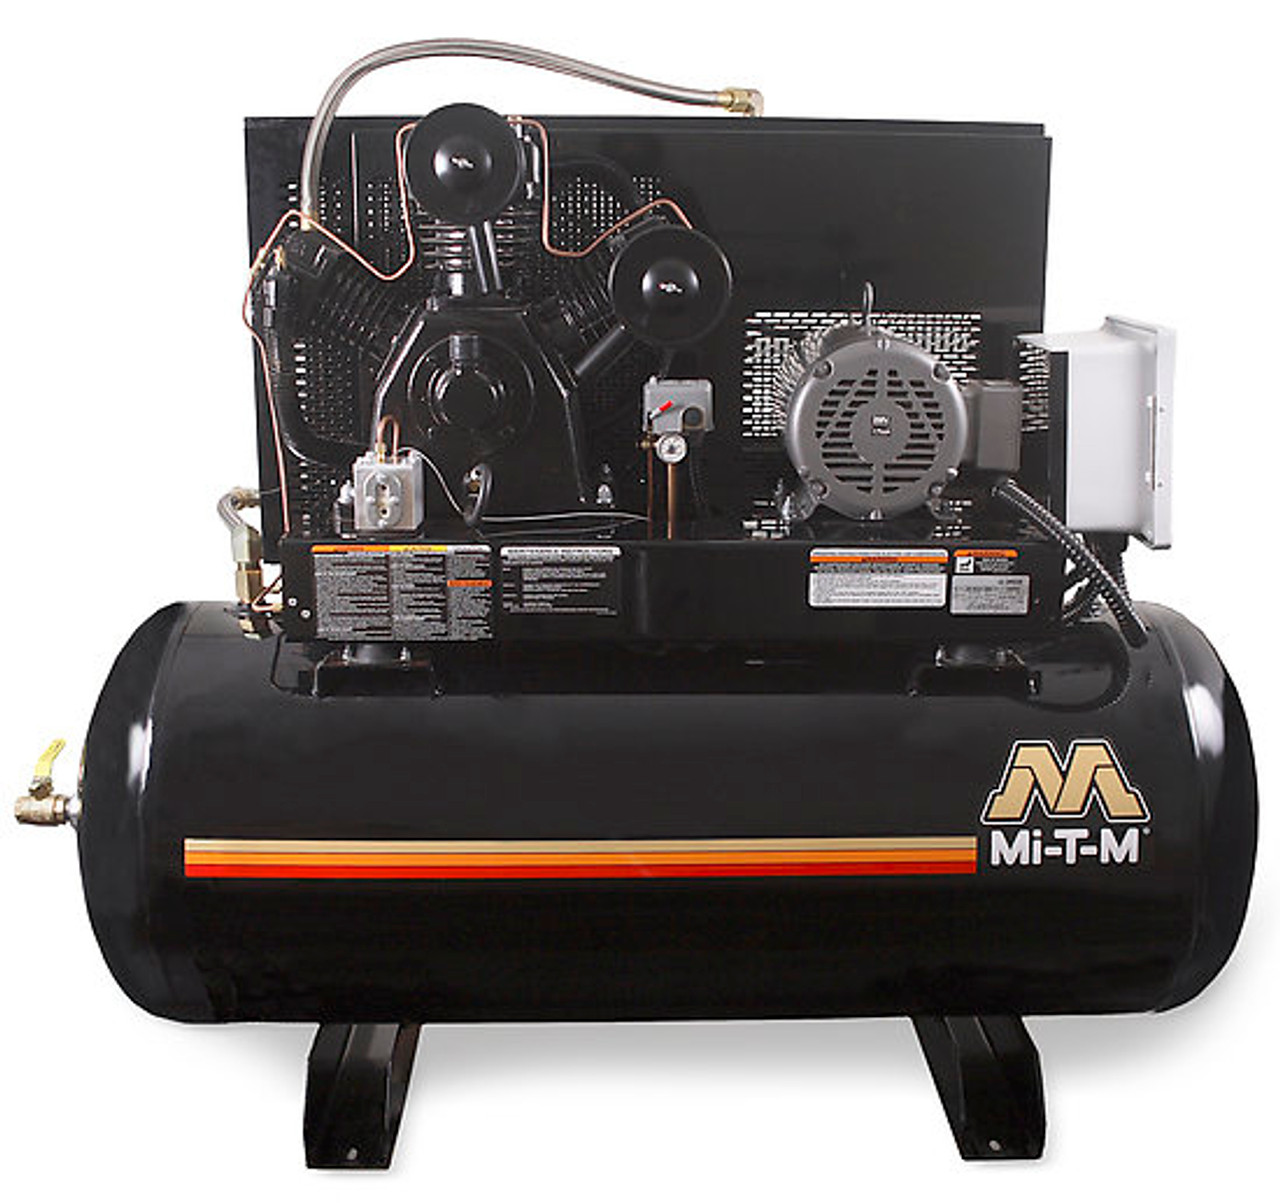 Mi-T-M ADS-20310-120HM Electric Air Compressors, 120-Gallon Two Stage Electric Horizontal